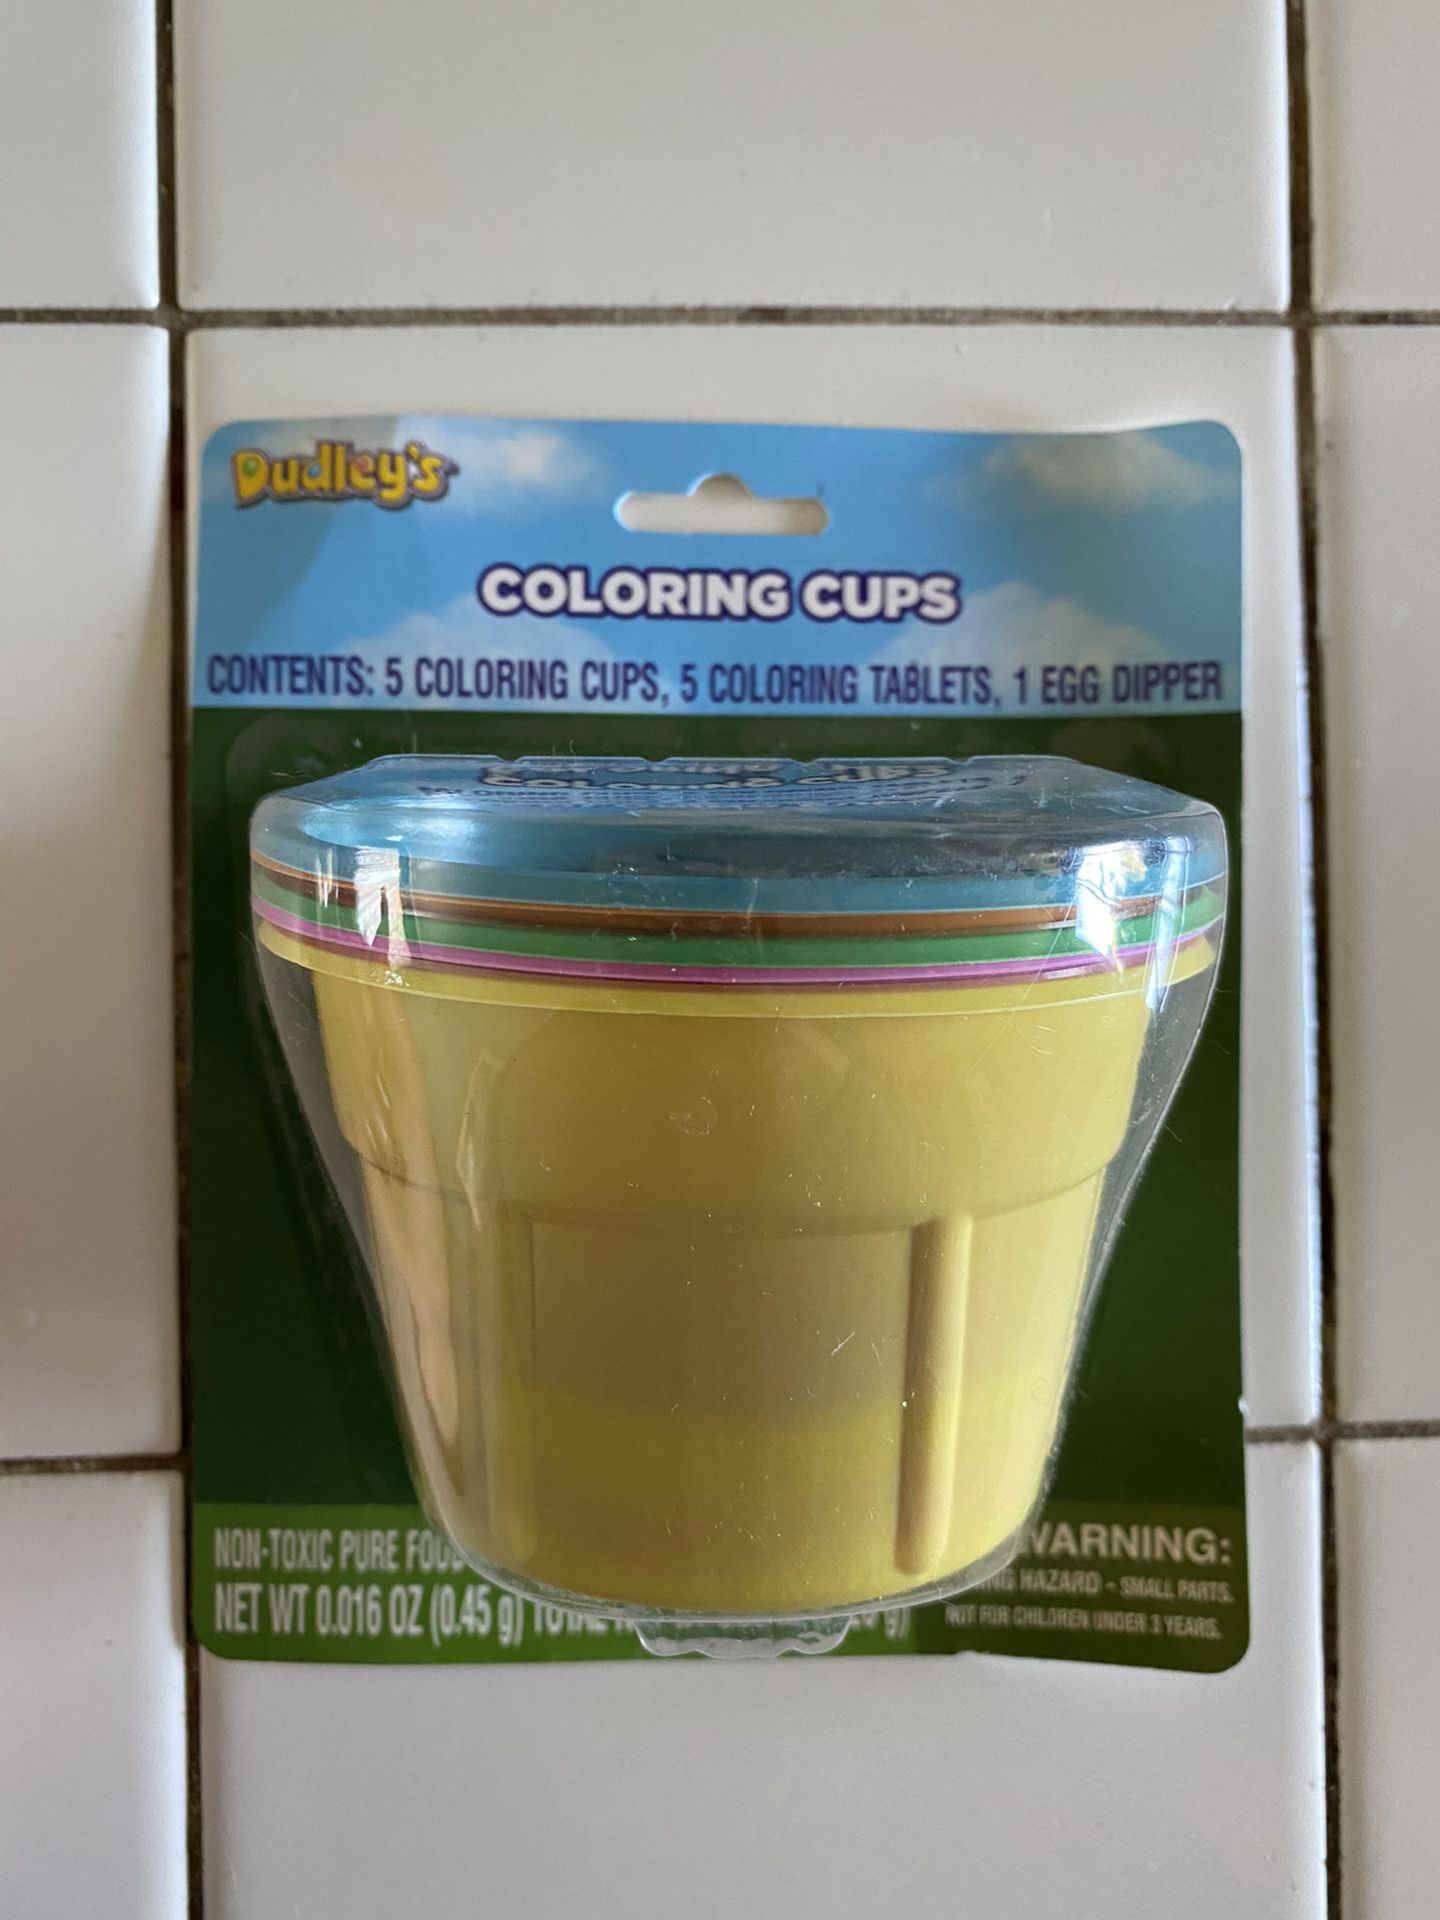 Dudley’s Coloring Cups